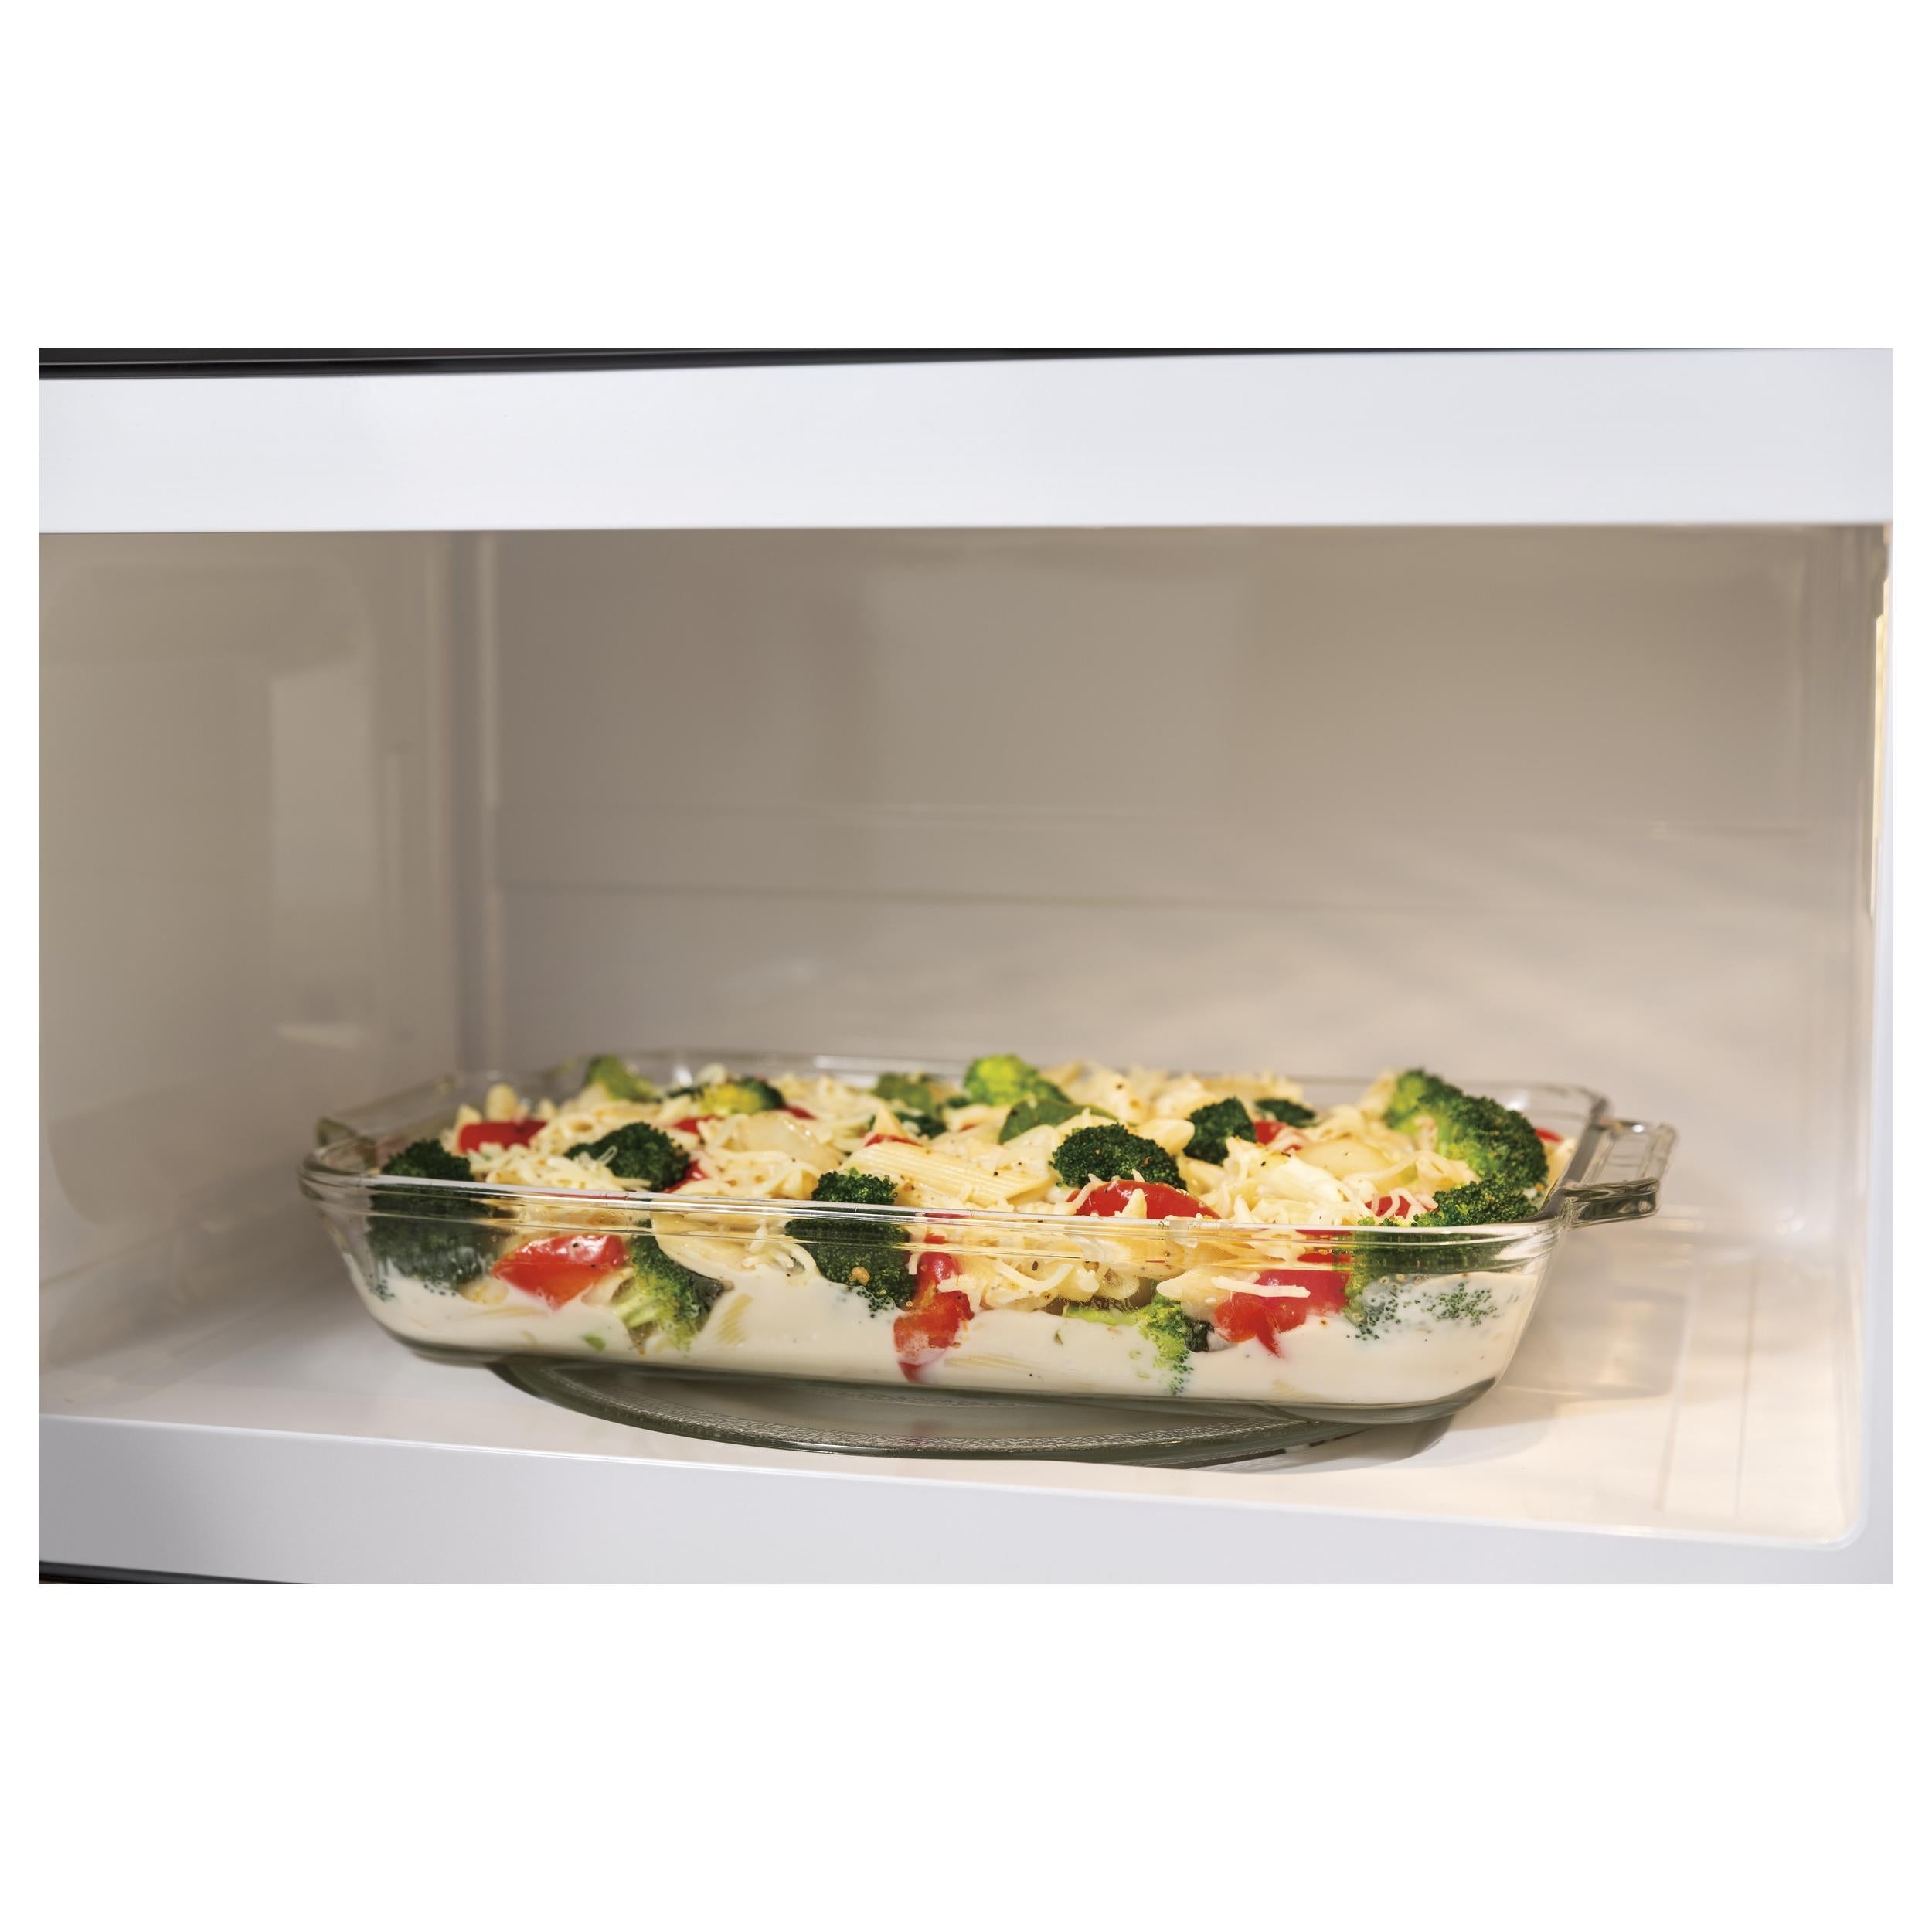 GE 30-inch, 1.7 cu.ft. Over-the-Range Microwave Oven with Sensor Cooking JVM6175BLTS